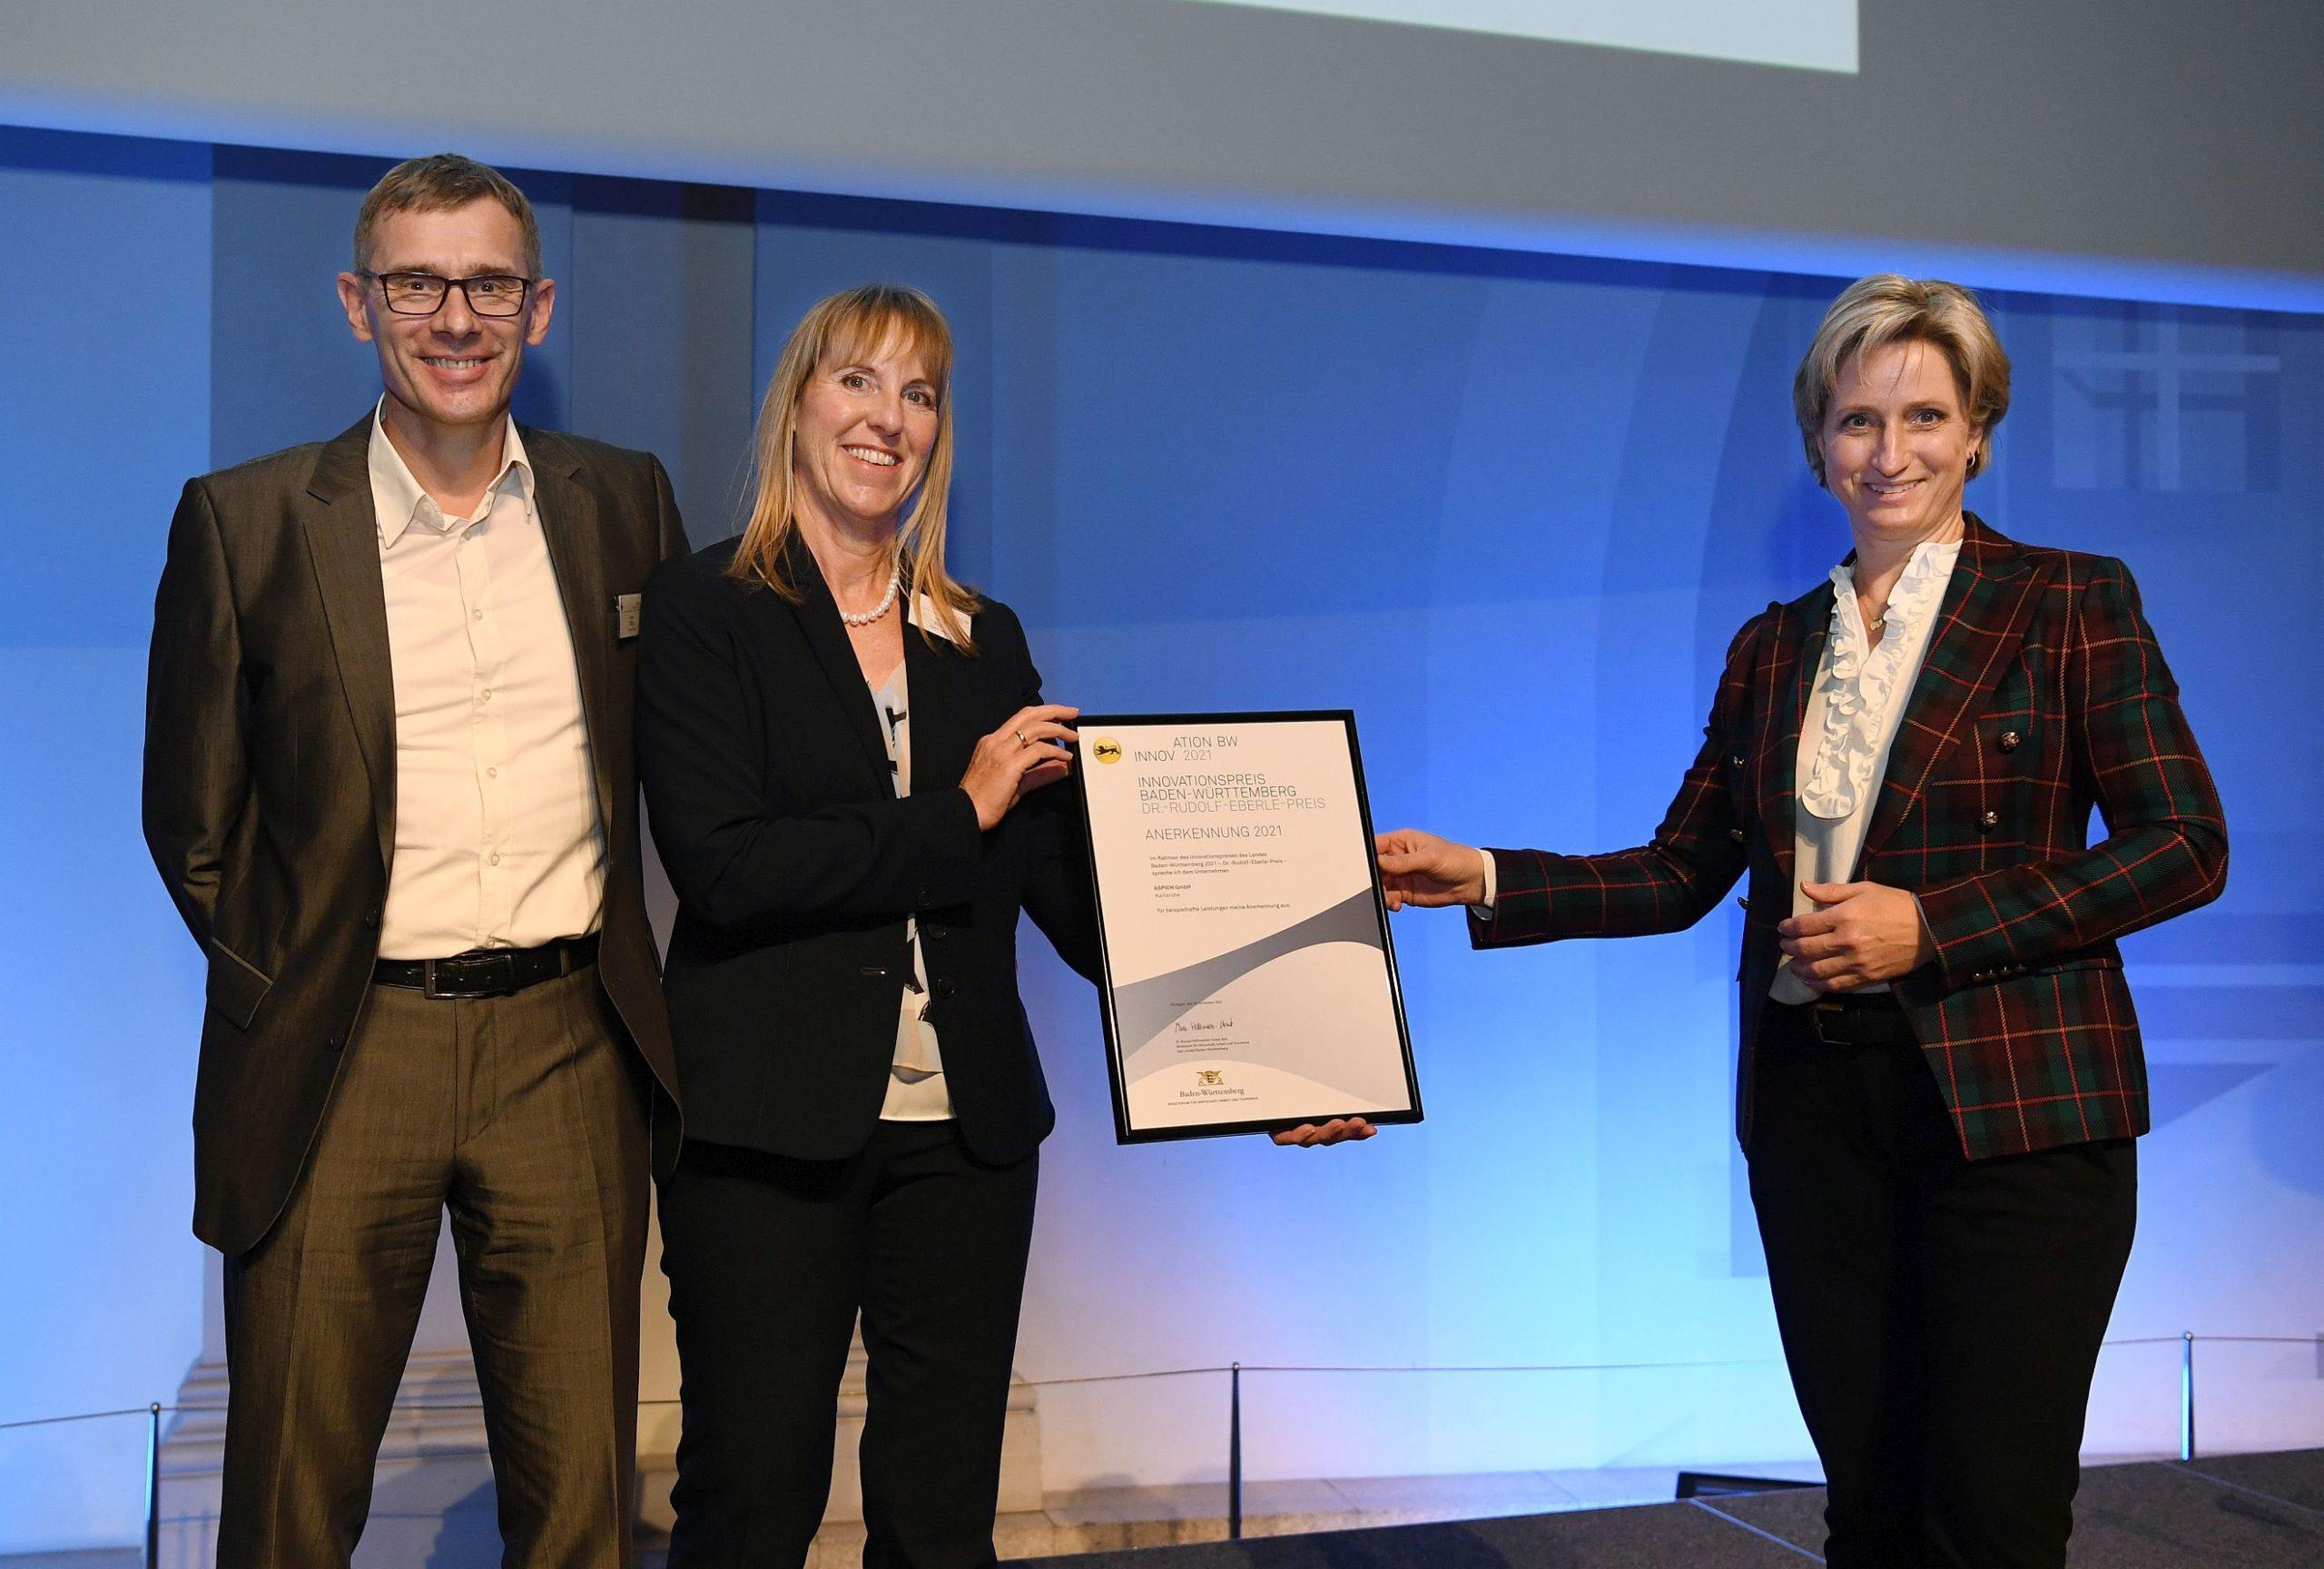 On 16 November 2021, Minister of Economic Affairs Dr Hoffmeister-Kraut presented ASPION's managing director duo Martina and Michael Wöhr with the Baden-Württemberg Innovation Prize.